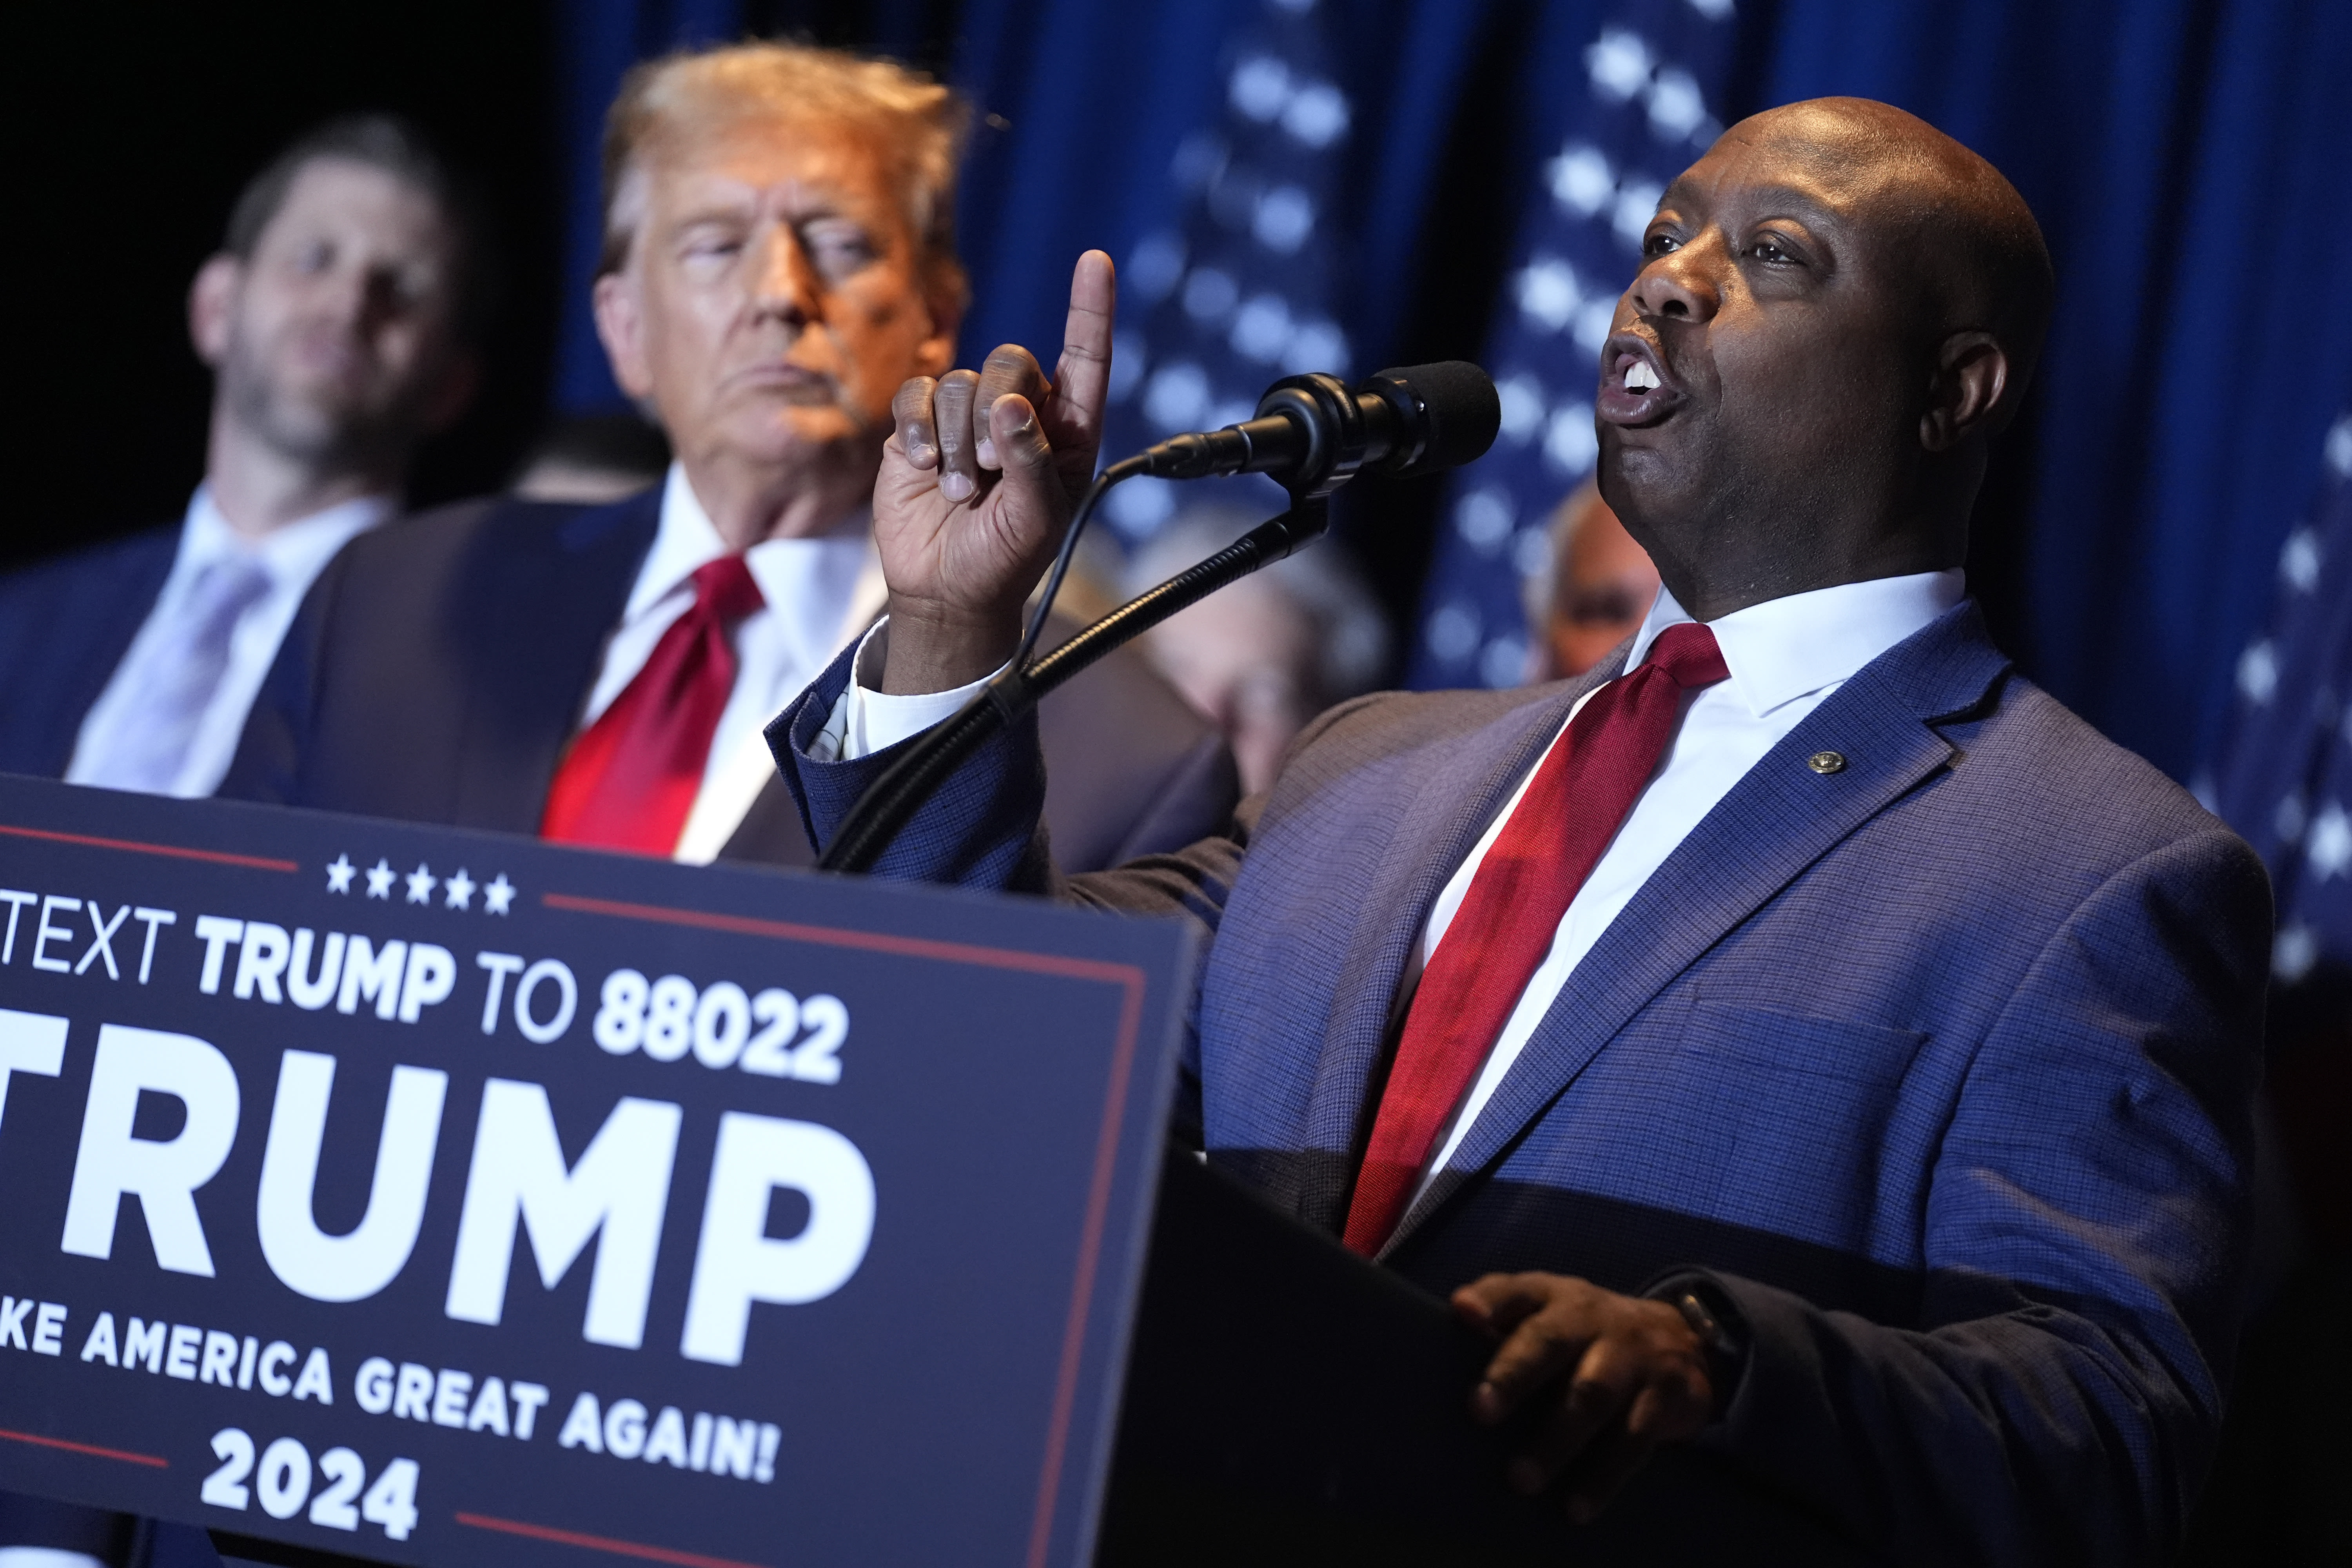 Tim Scott, a potential Trump VP pick, launches a $14 million outreach effort to minority voters